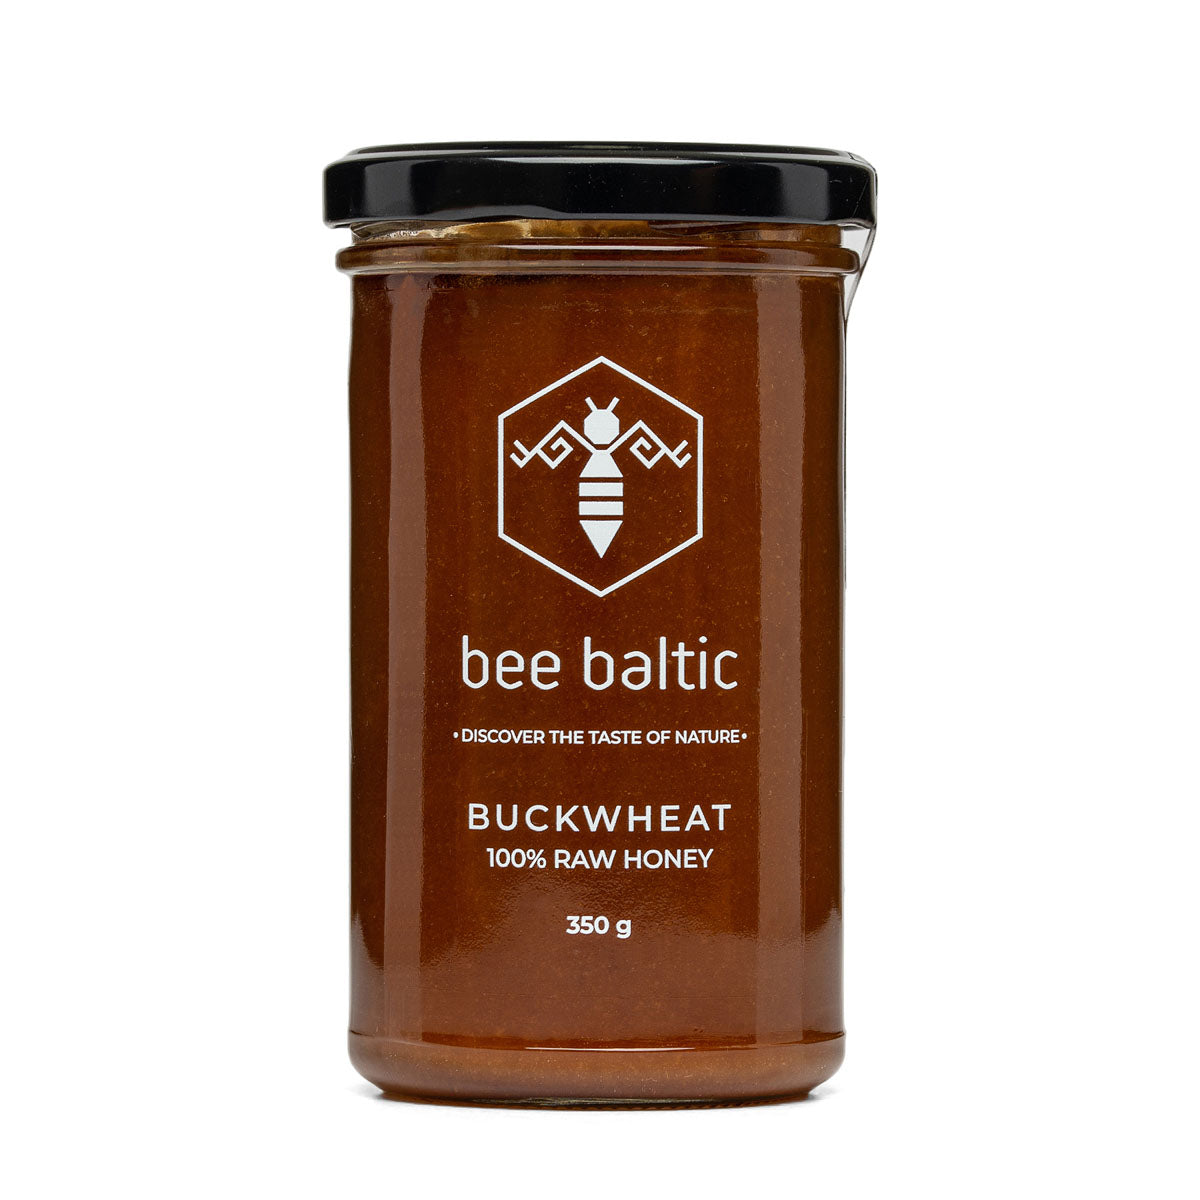 Buckwheat Raw Honey (350g) | Bee Baltic | Raw Living UK | Bee Product | Raw Foods | Honeys | Bee Baltic&#39;s Raw Buckwheat Honey is known for its Anti-Oxidants, Iron Content &amp; Vitamins. It&#39;s mahogany colour perfectly complements its Rich &amp; Earthy Flavour.